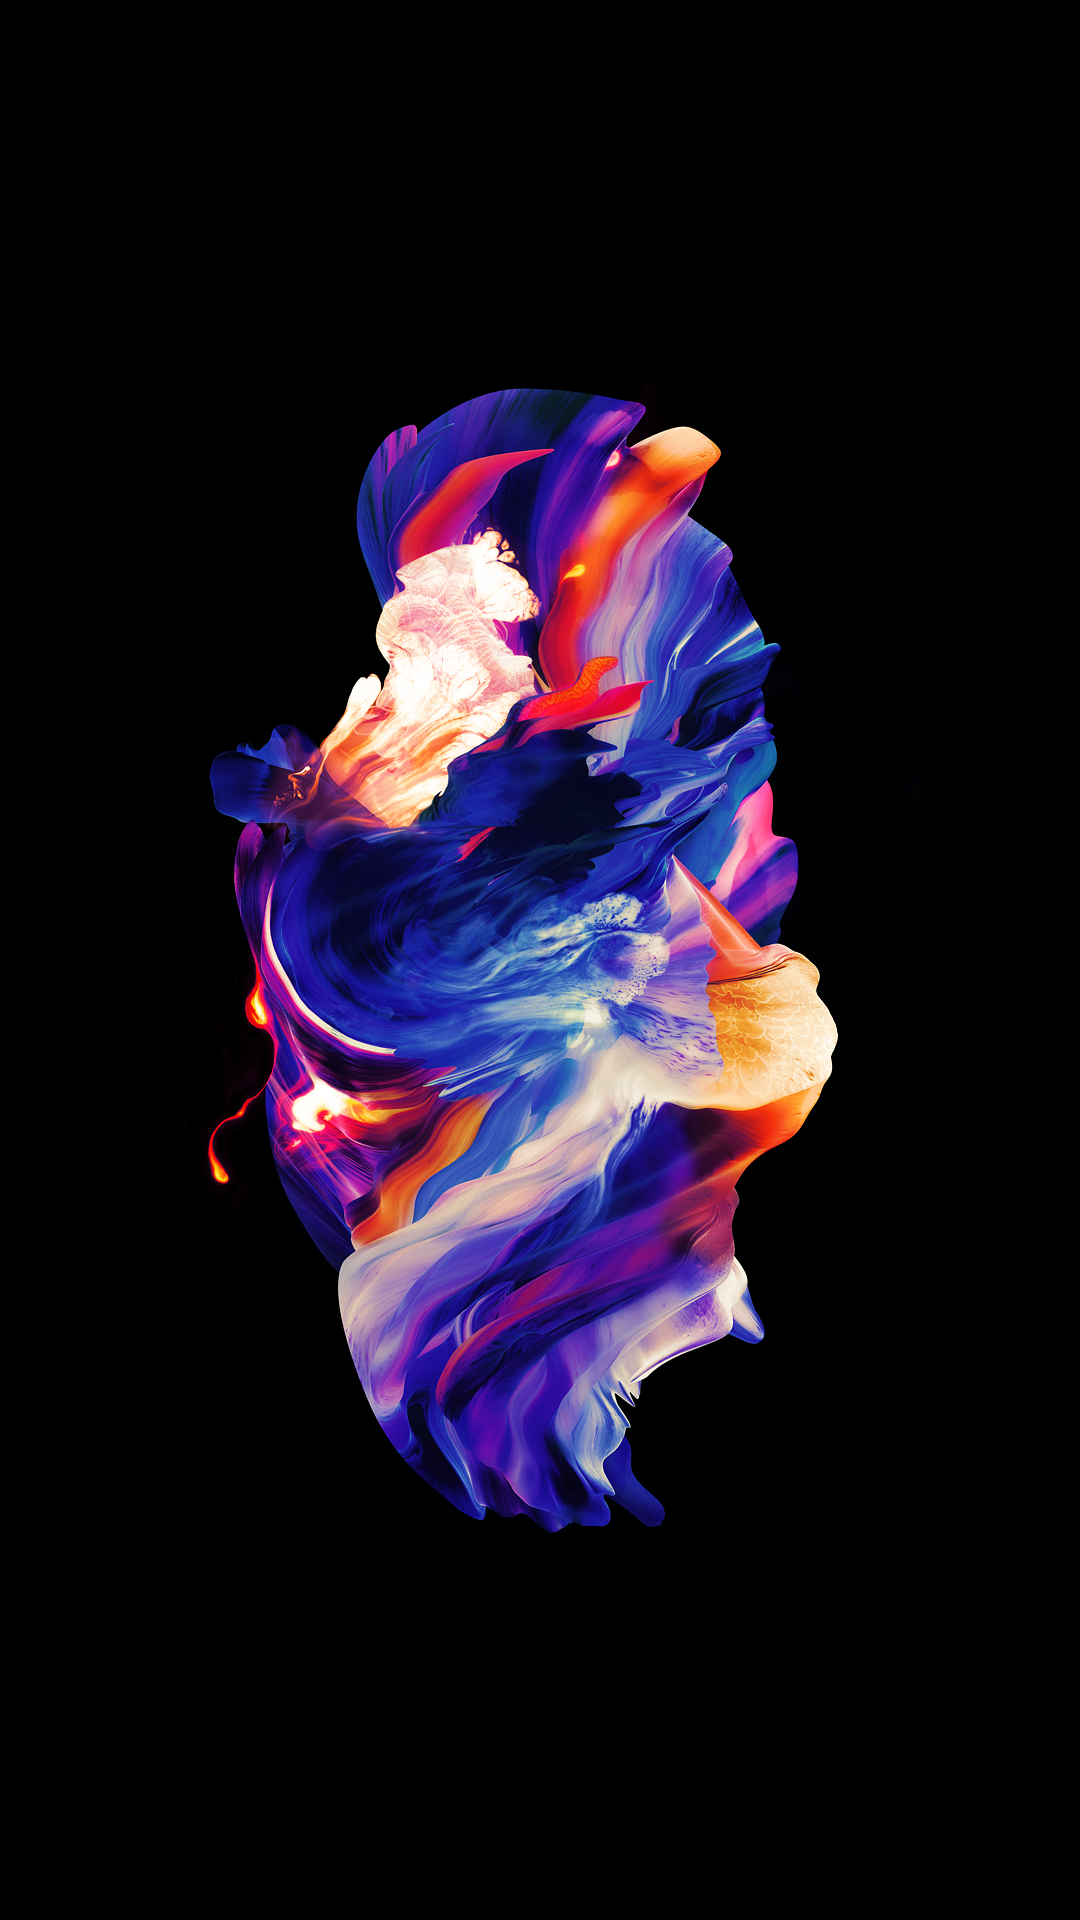 Download: OnePlus 5 wallpapers - FHD and 4K resolutions! - FWNED